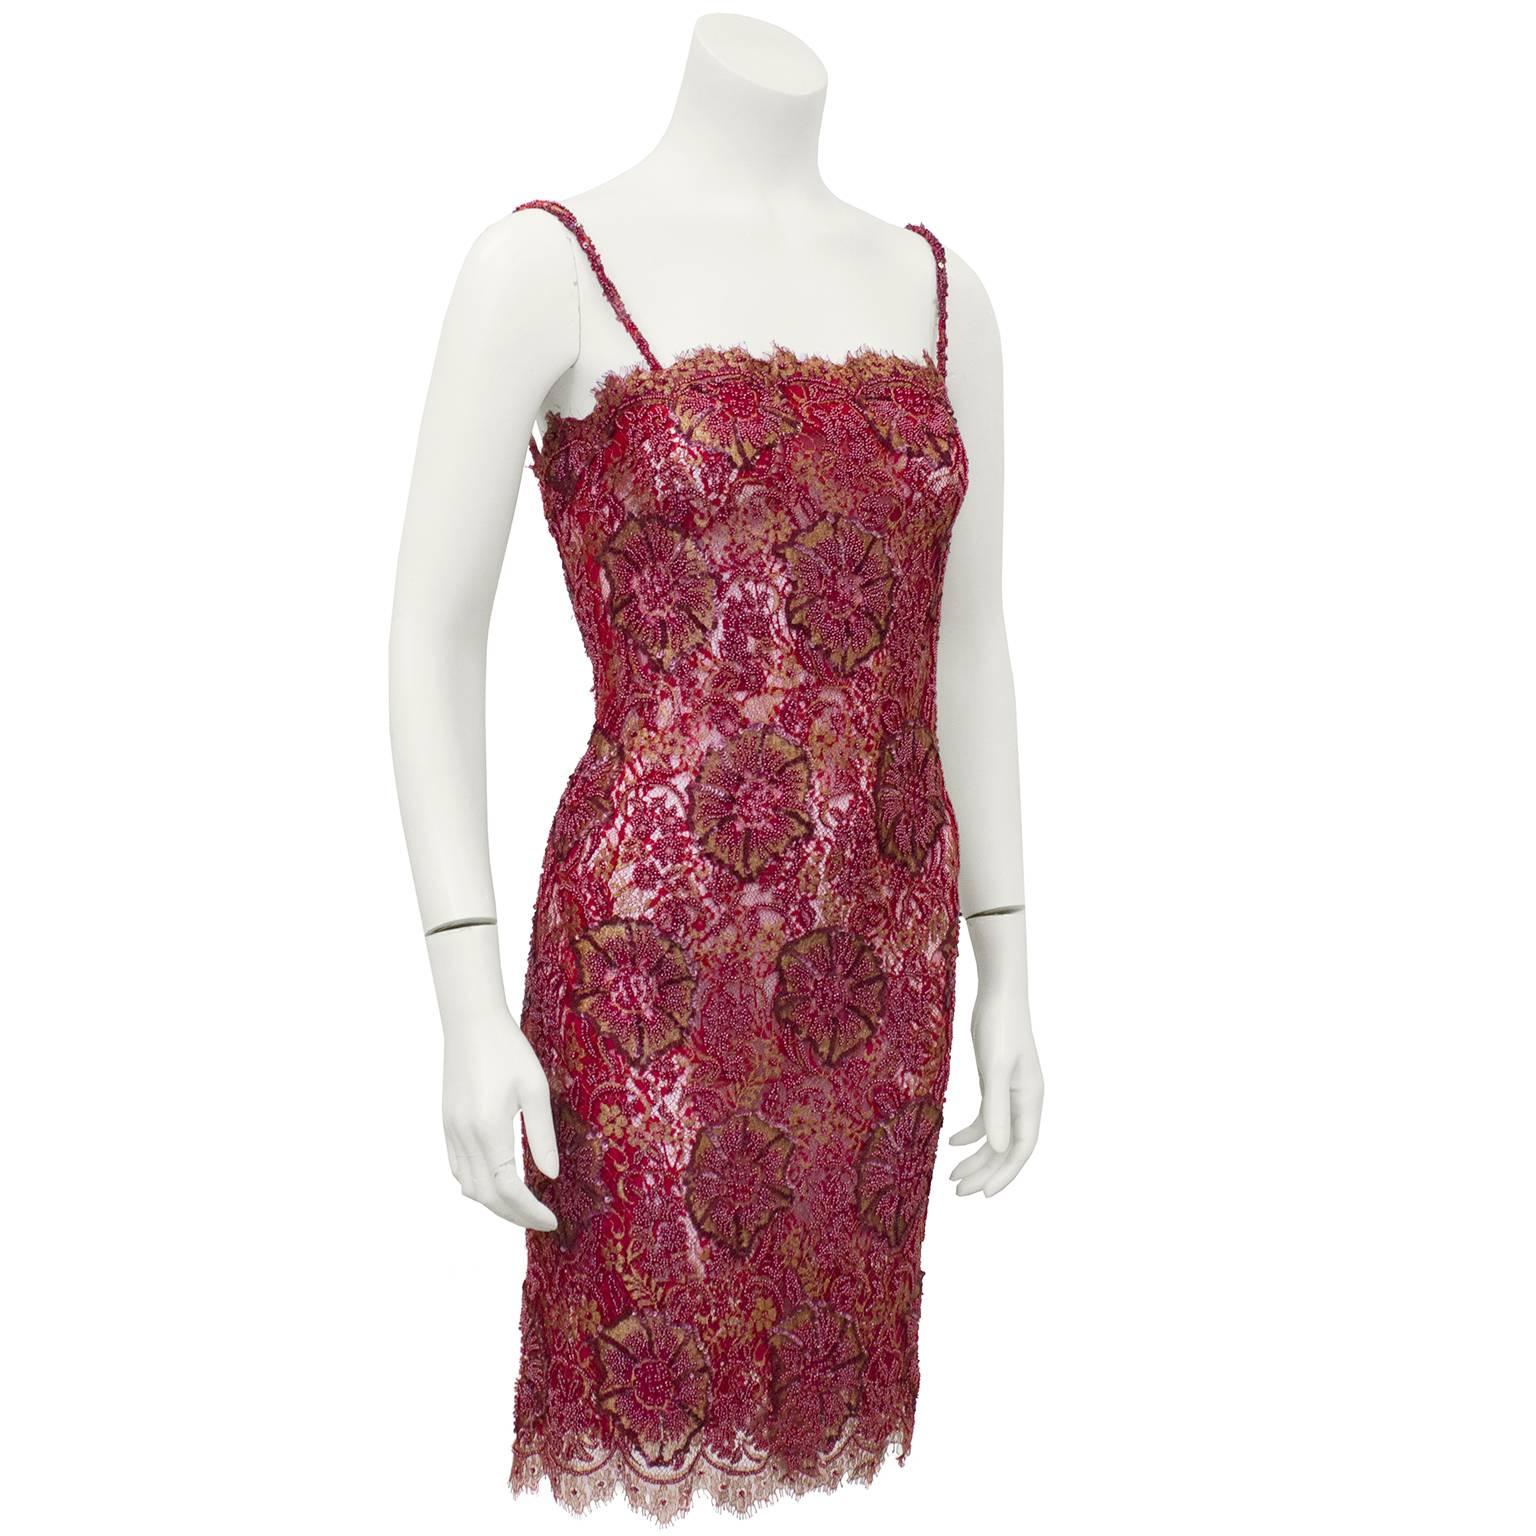 Exquisite anonymous 1960s cranberry and gold red lace demi couture cocktail dress featuring an exquisite floral lace design with hand beading and gold metallic thread embroidery. Unbelievable attention to detail causes larger flowers throughout to